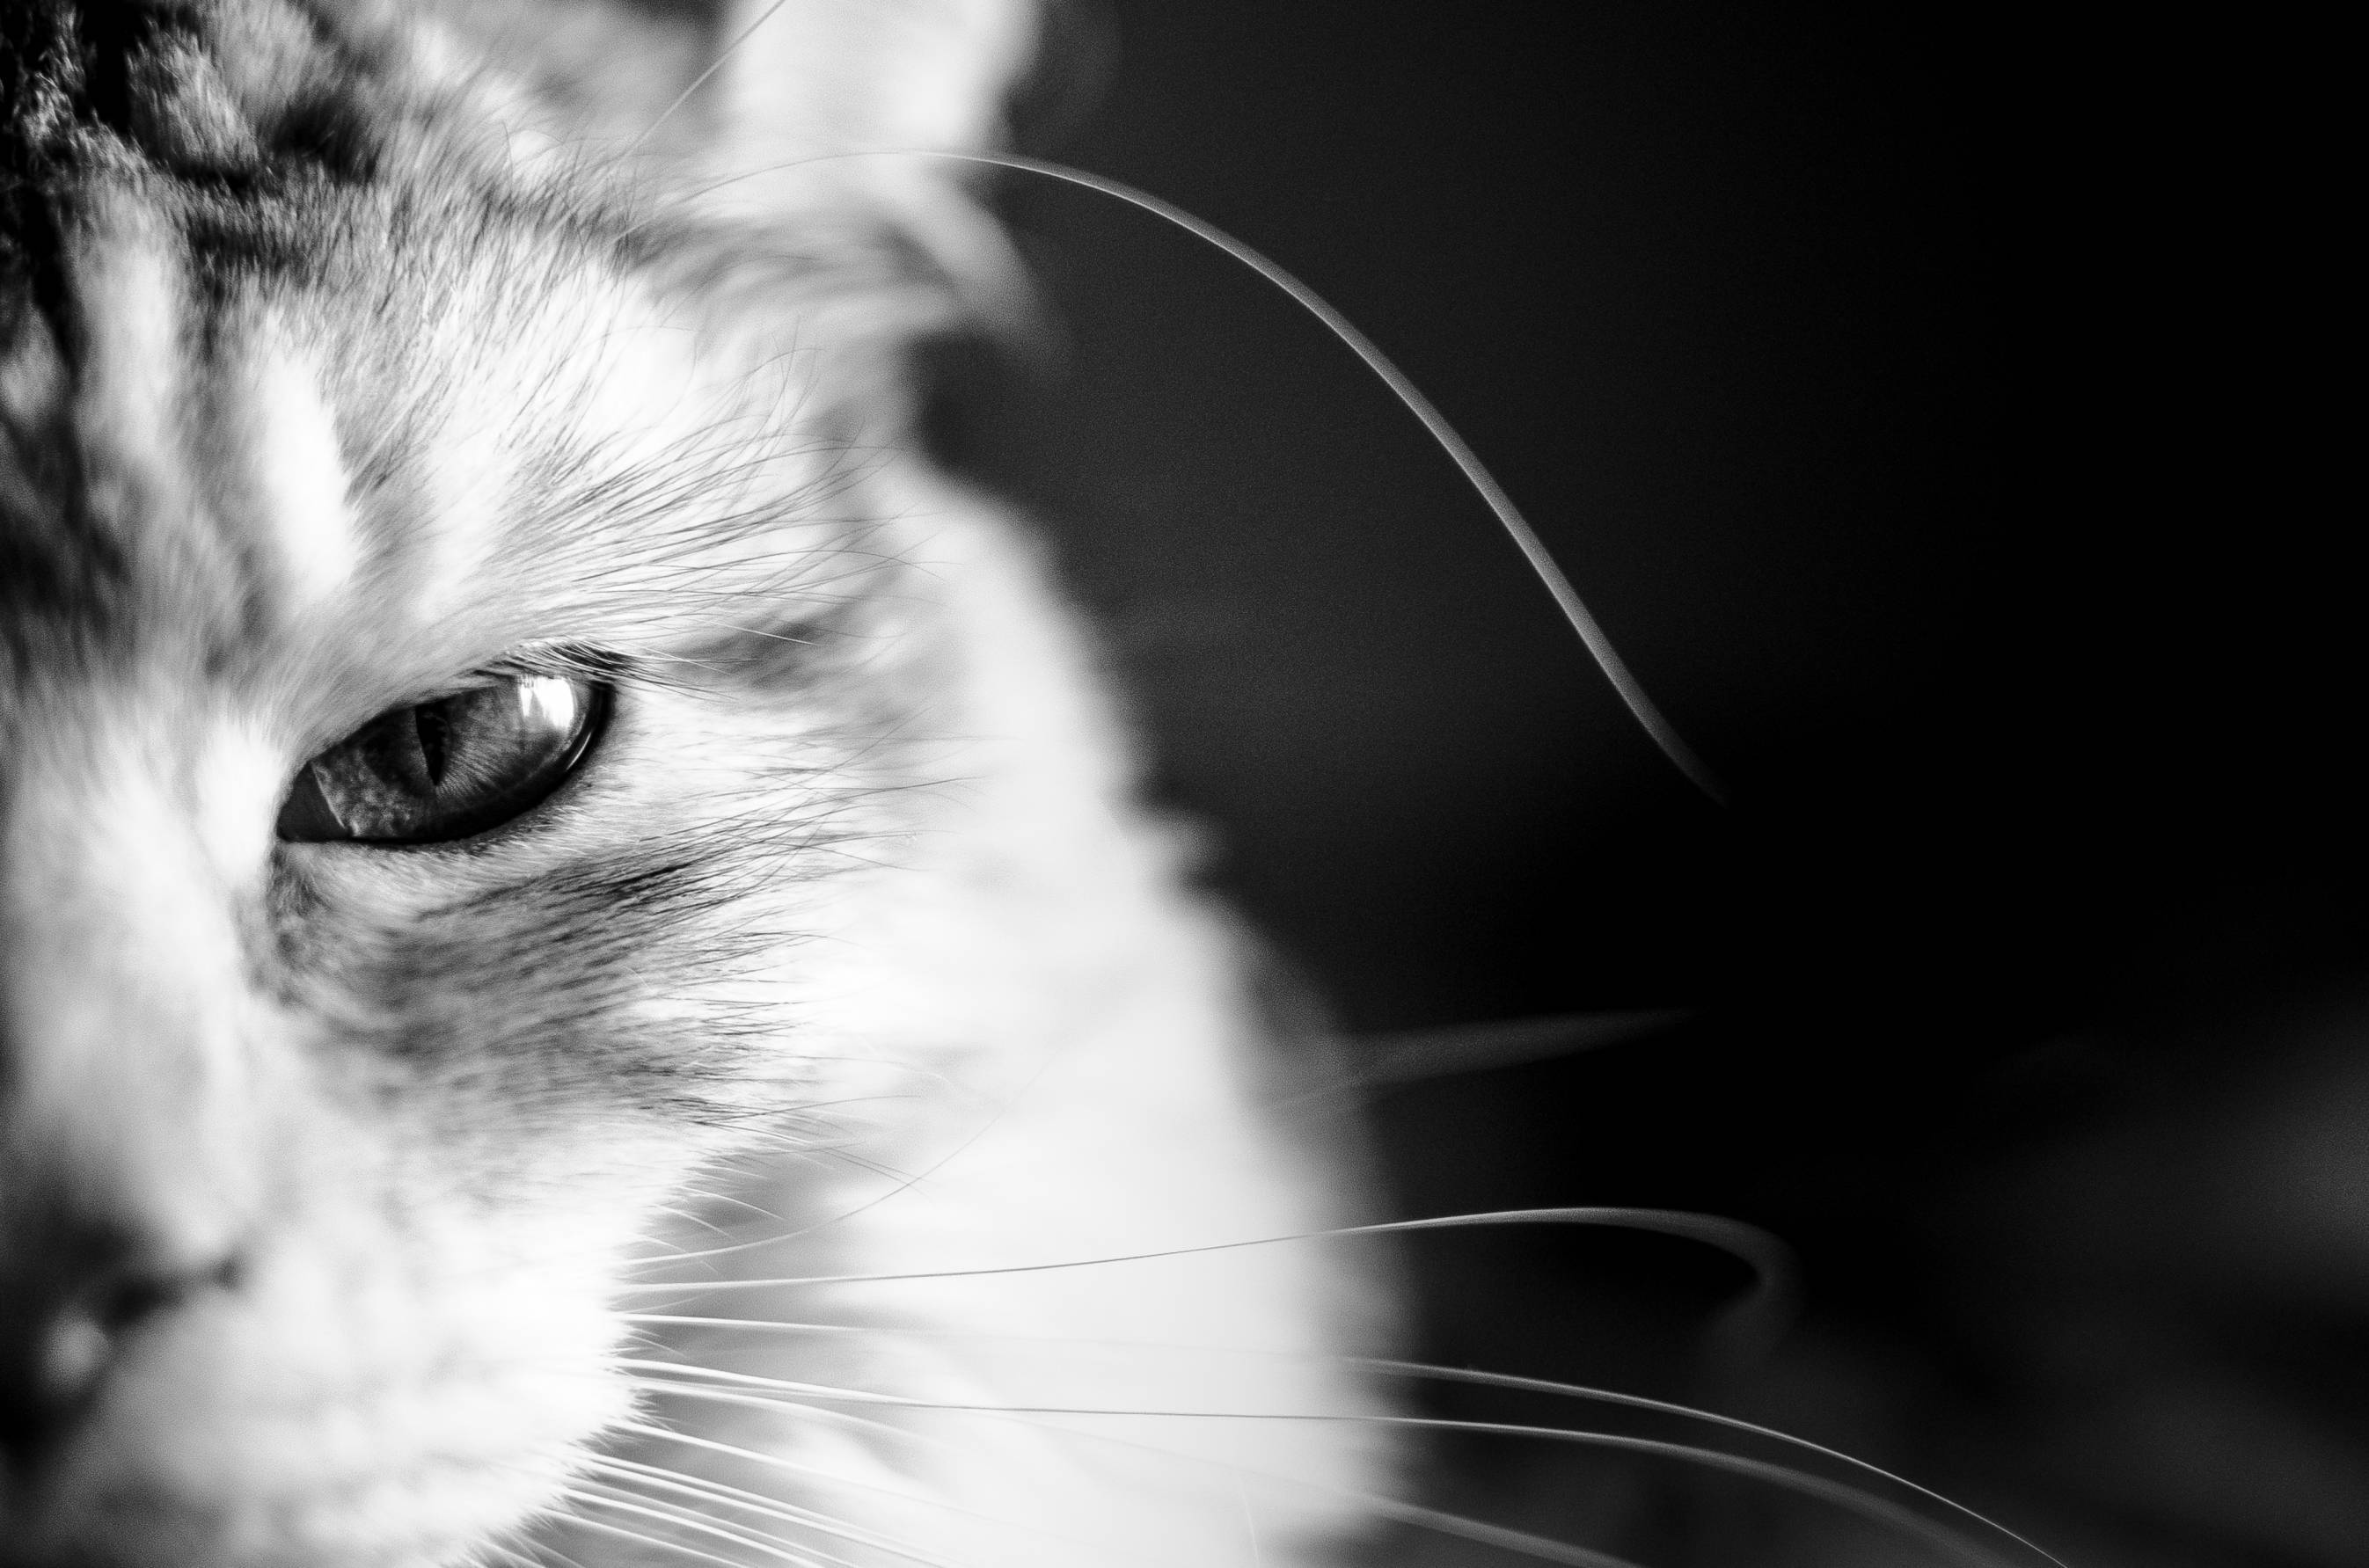 Maine coon cat on a black background wallpaper and image